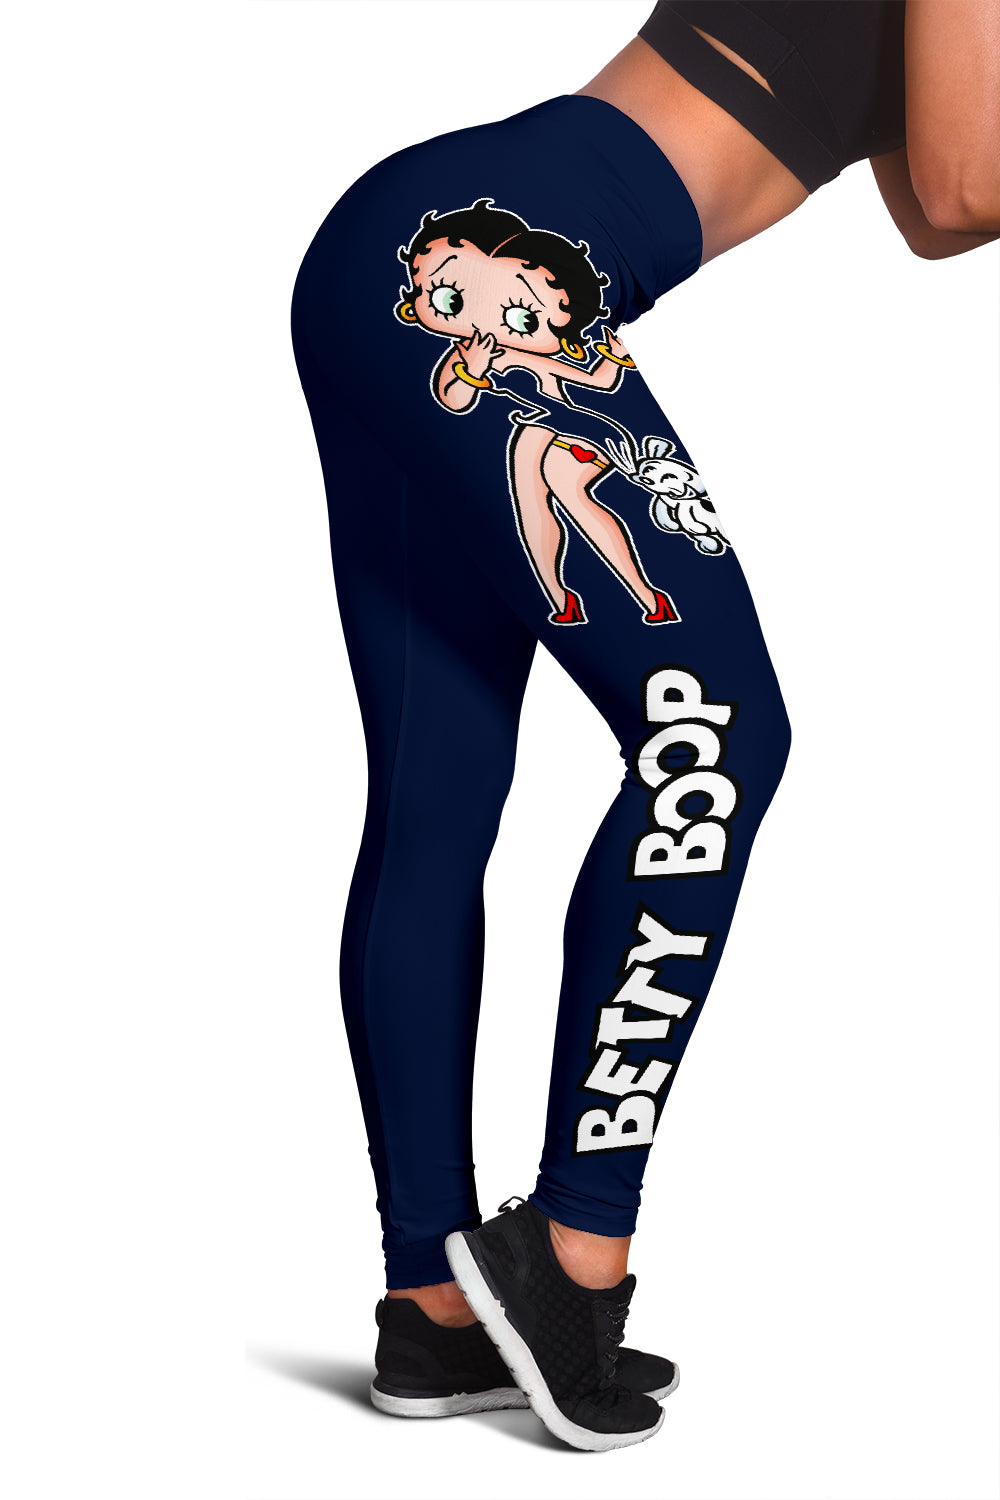 The Betty Boop Mystery Revealed Leggings for Sale by